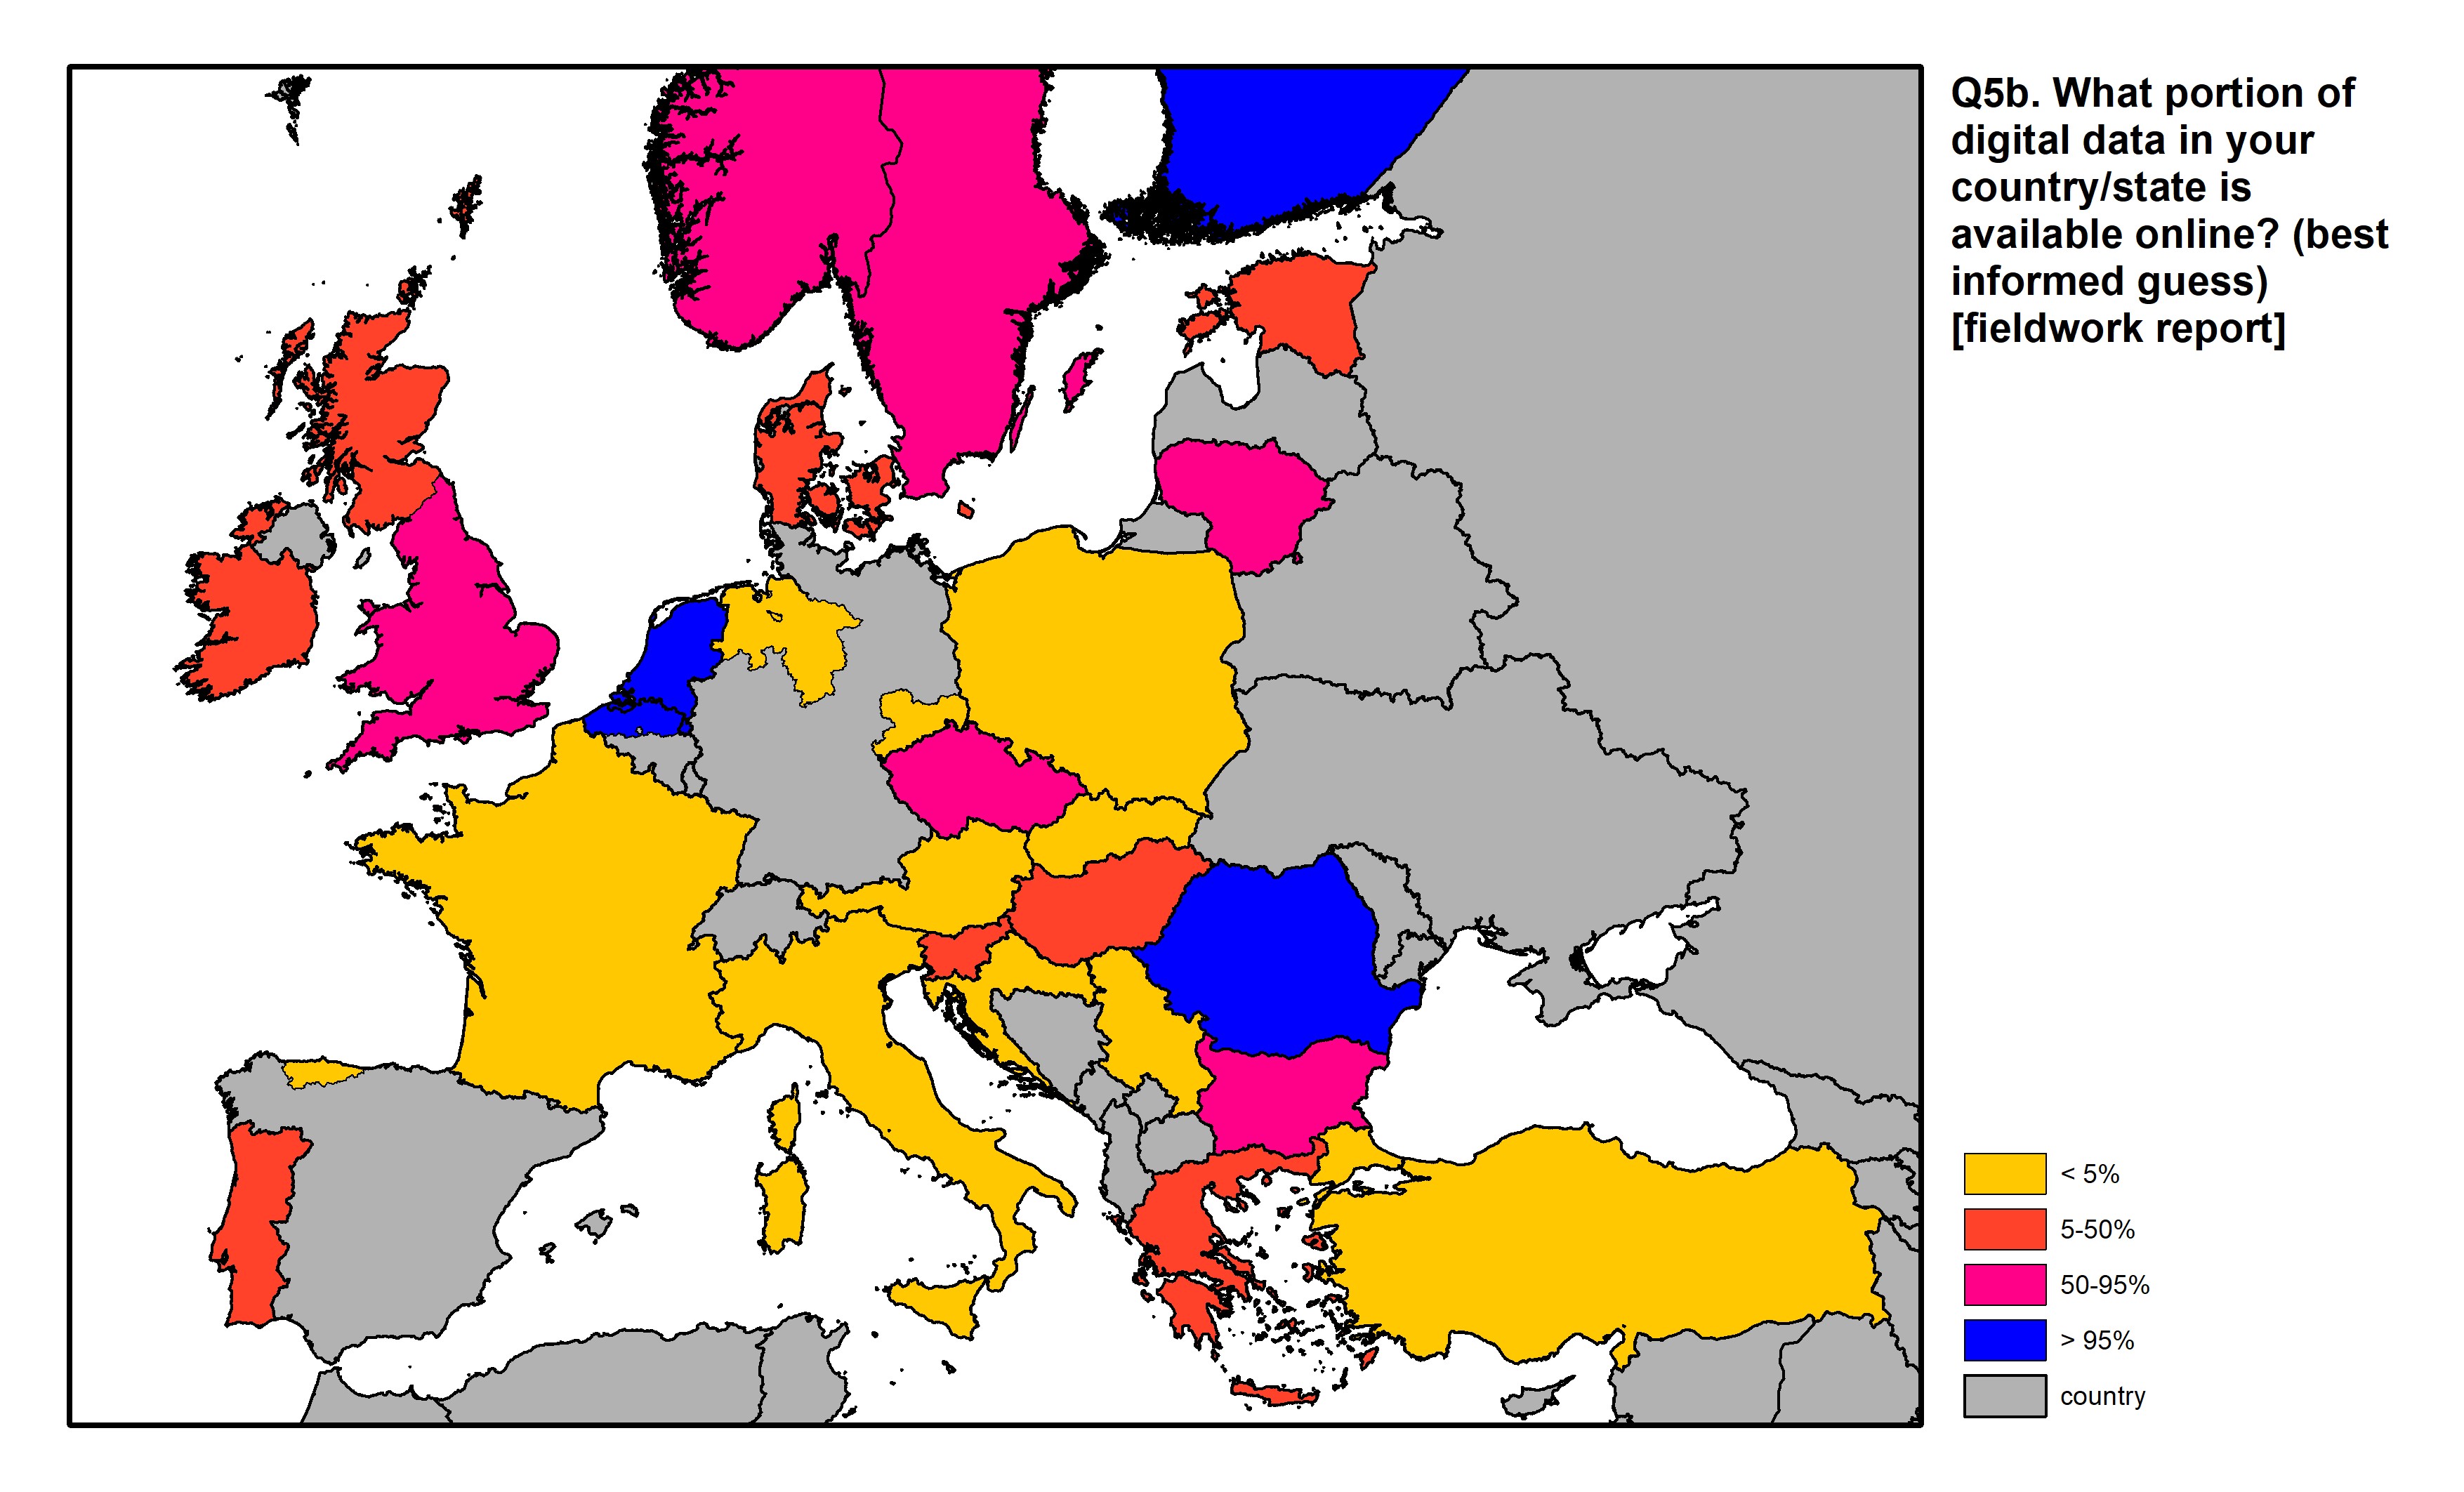 Figure 16: a map of Europe showing countries and regions in colour based on response rates to the survey question.